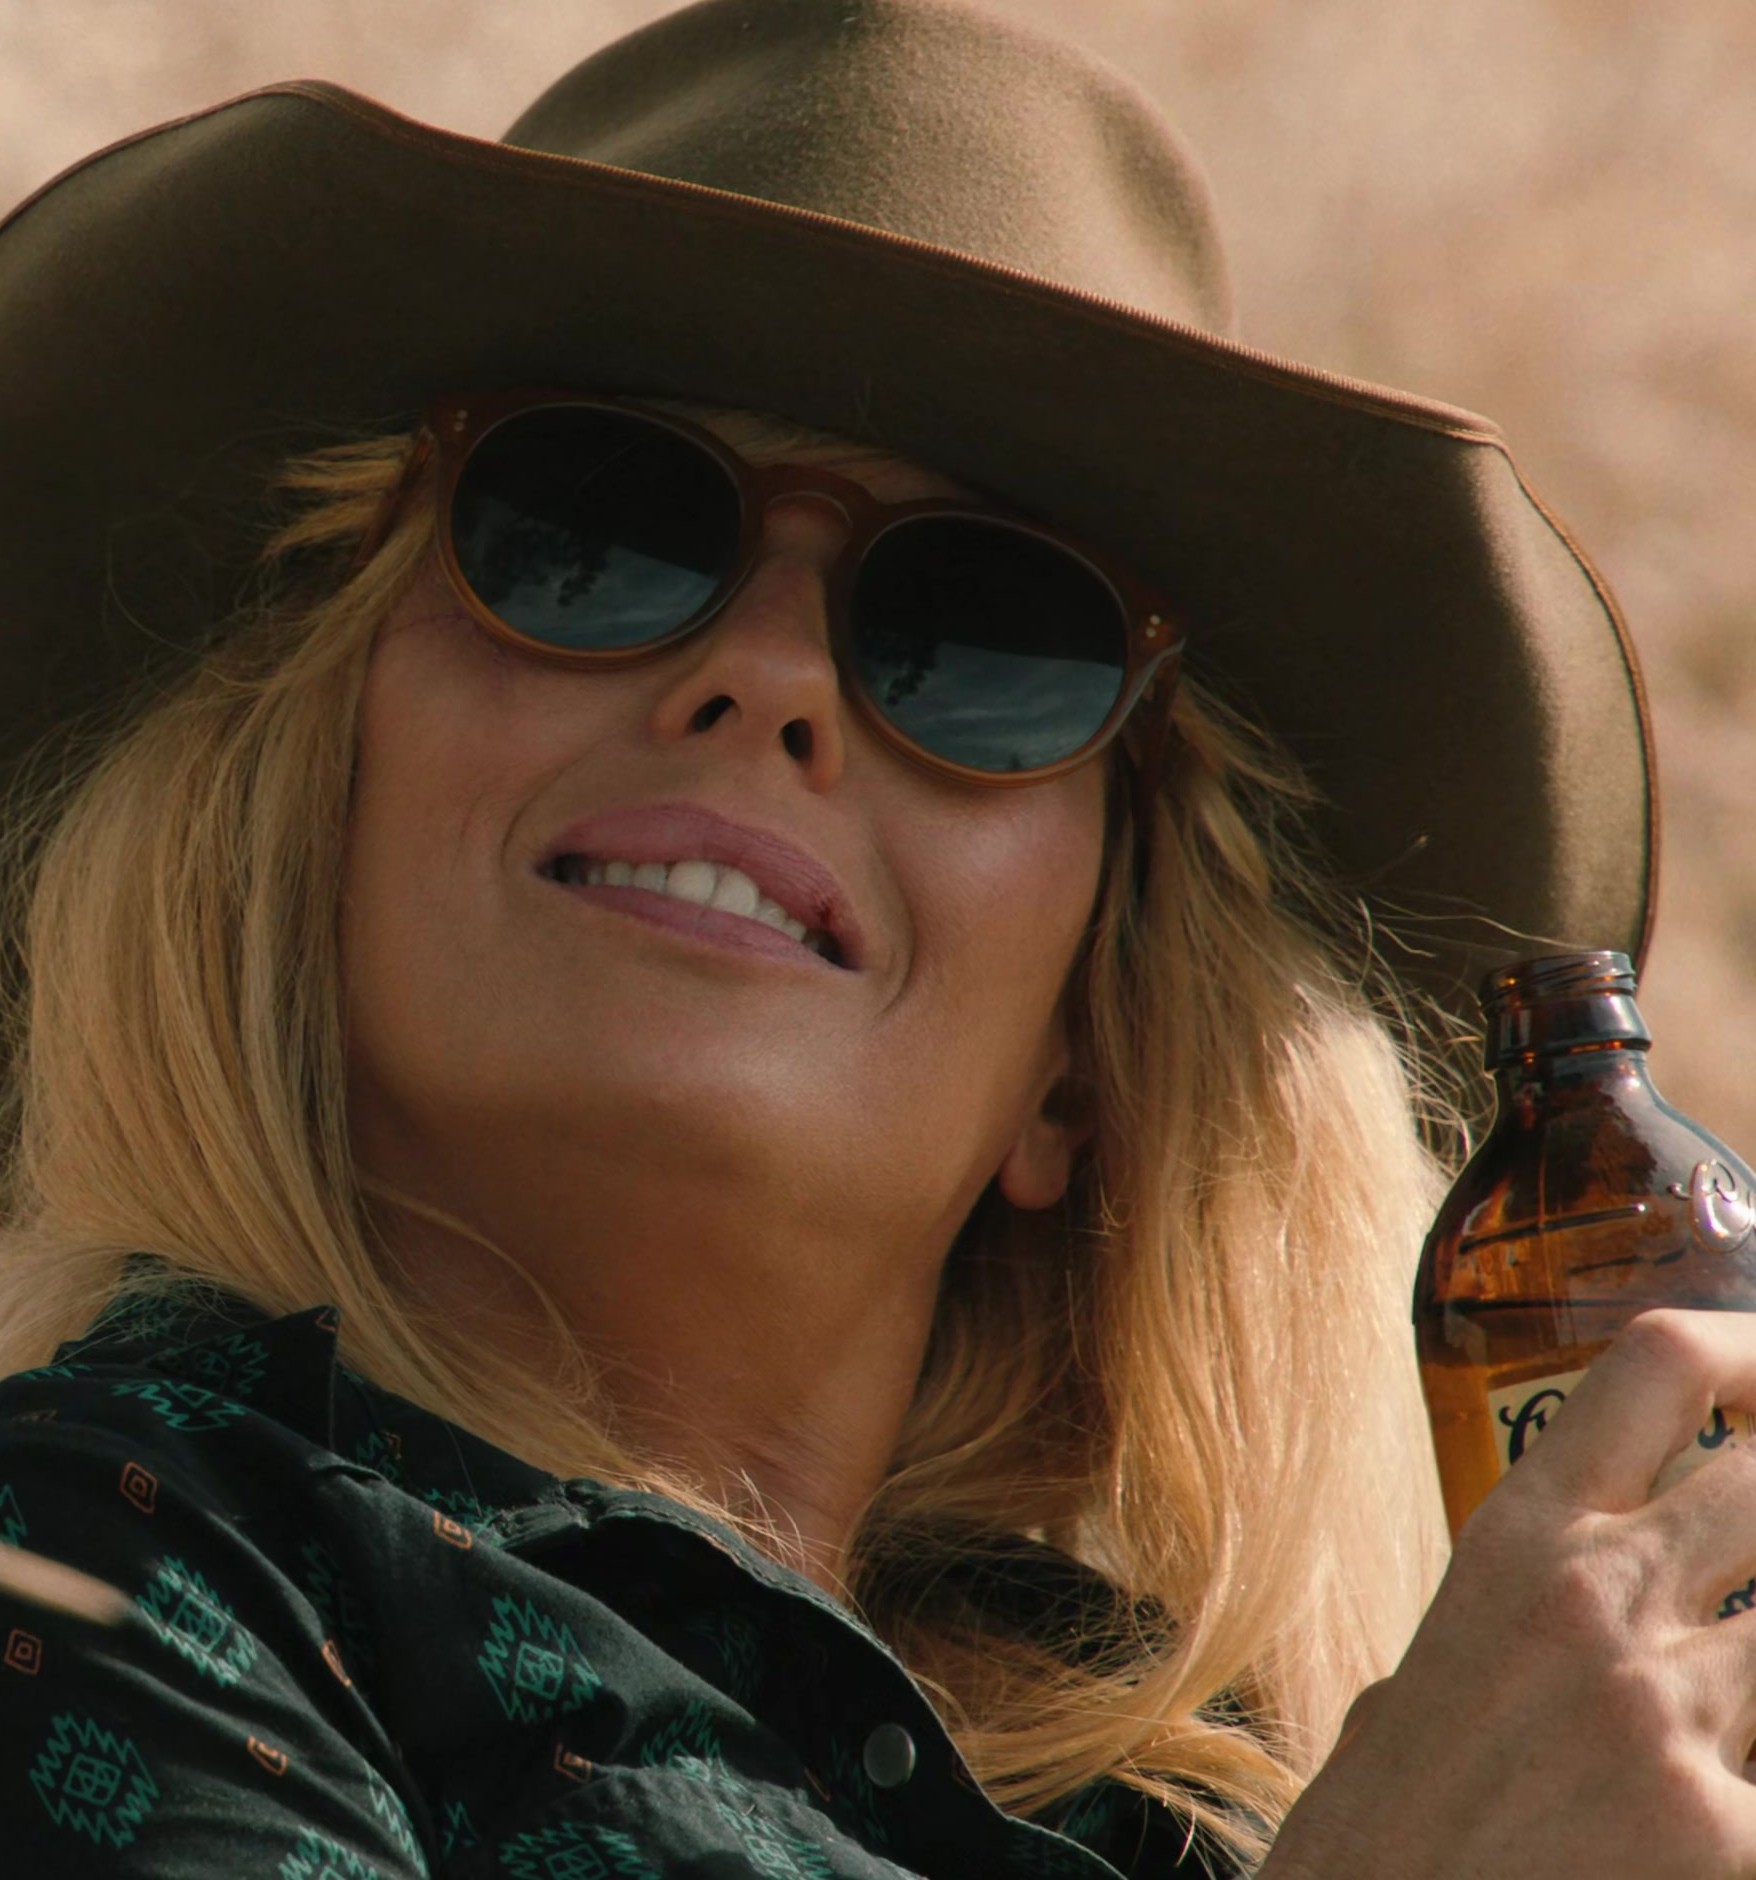 Worn on Yellowstone TV Show - Round Tortoiseshell Frame Gradient Sunglasses of Kelly Reilly as Bethany "Beth" Dutton